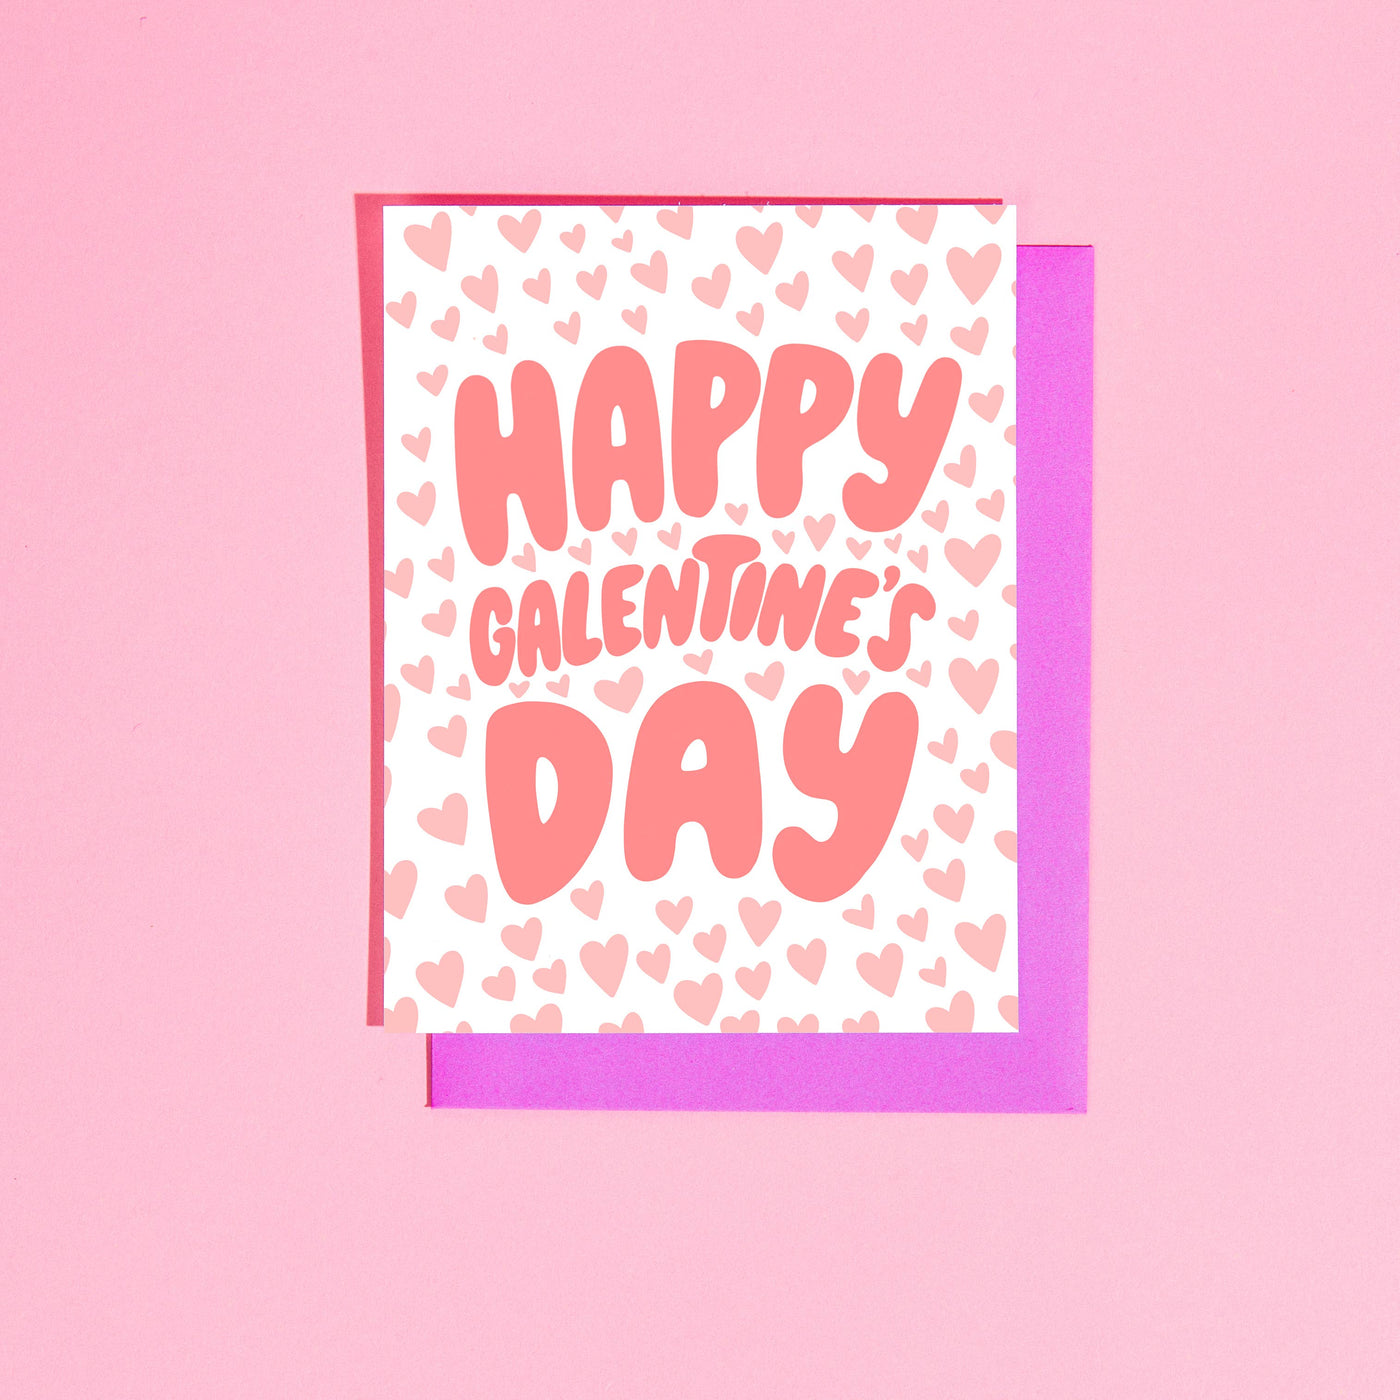 Happy Galentine’s Day Greeting Card